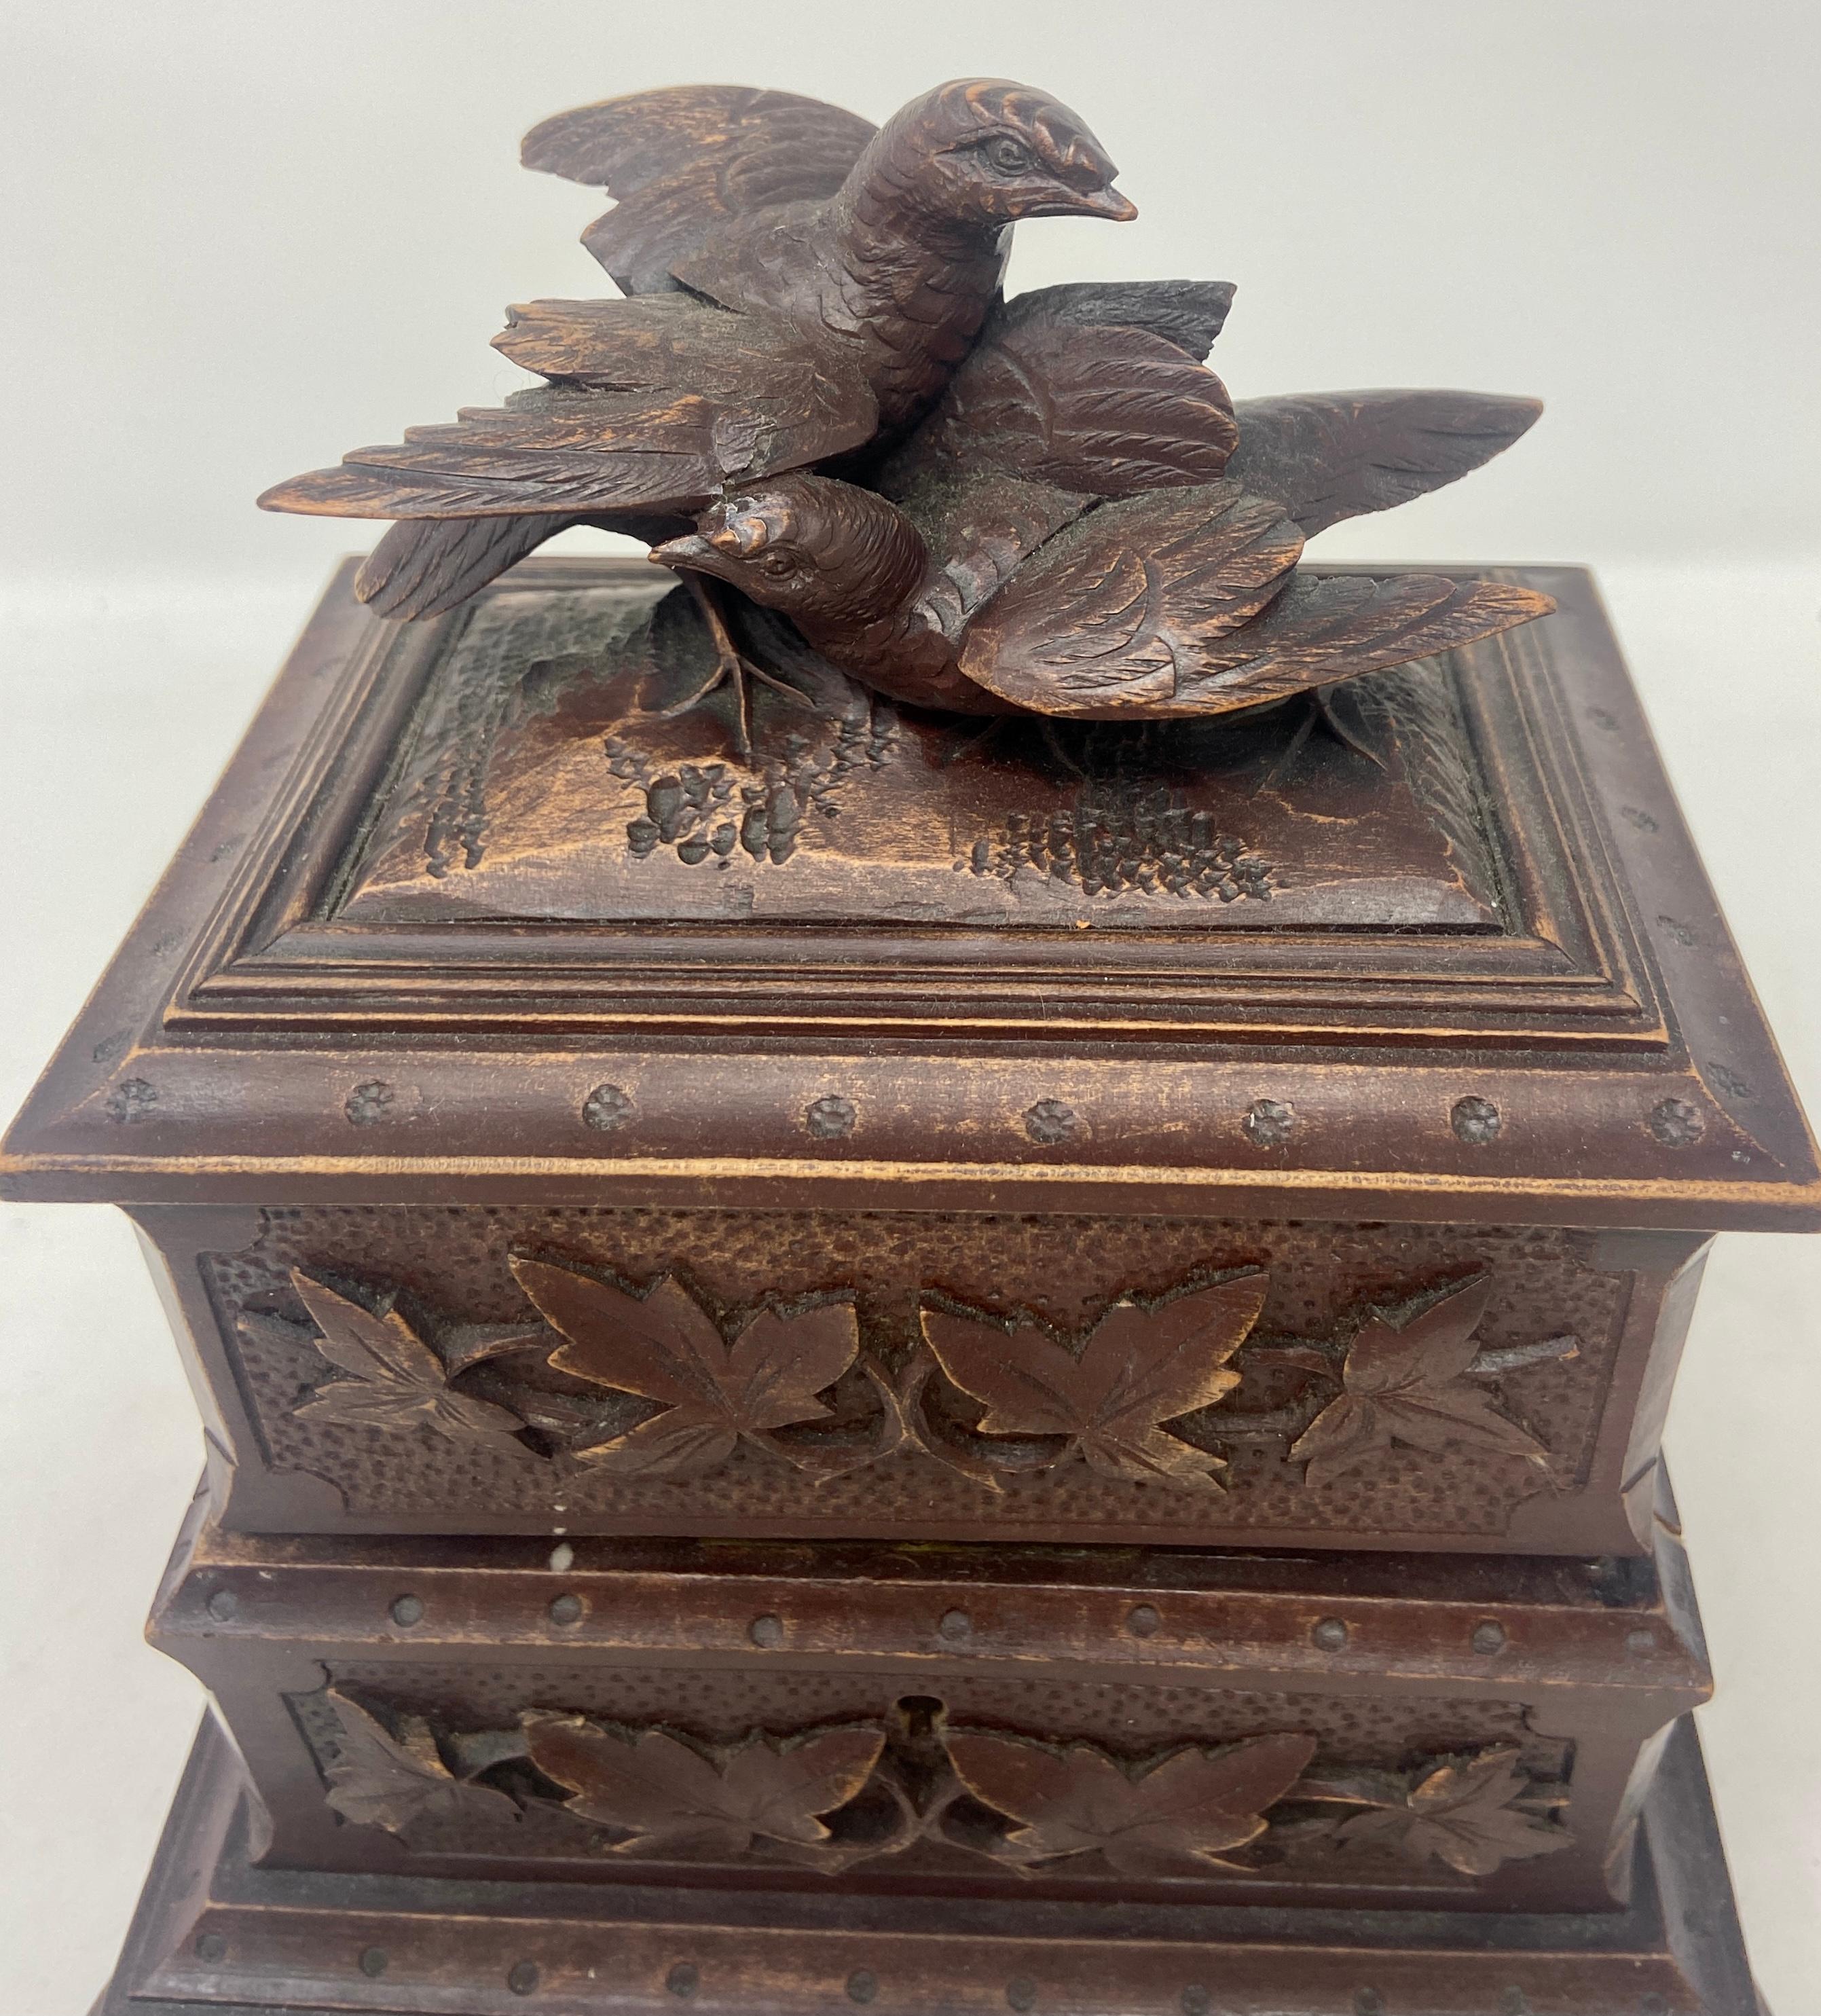 Antique French carved walnut jewel box, Circa 1880-1890. Beautifully carved with Lovebirds and Foliage, and with 3 Compartments newly lined on the interior.